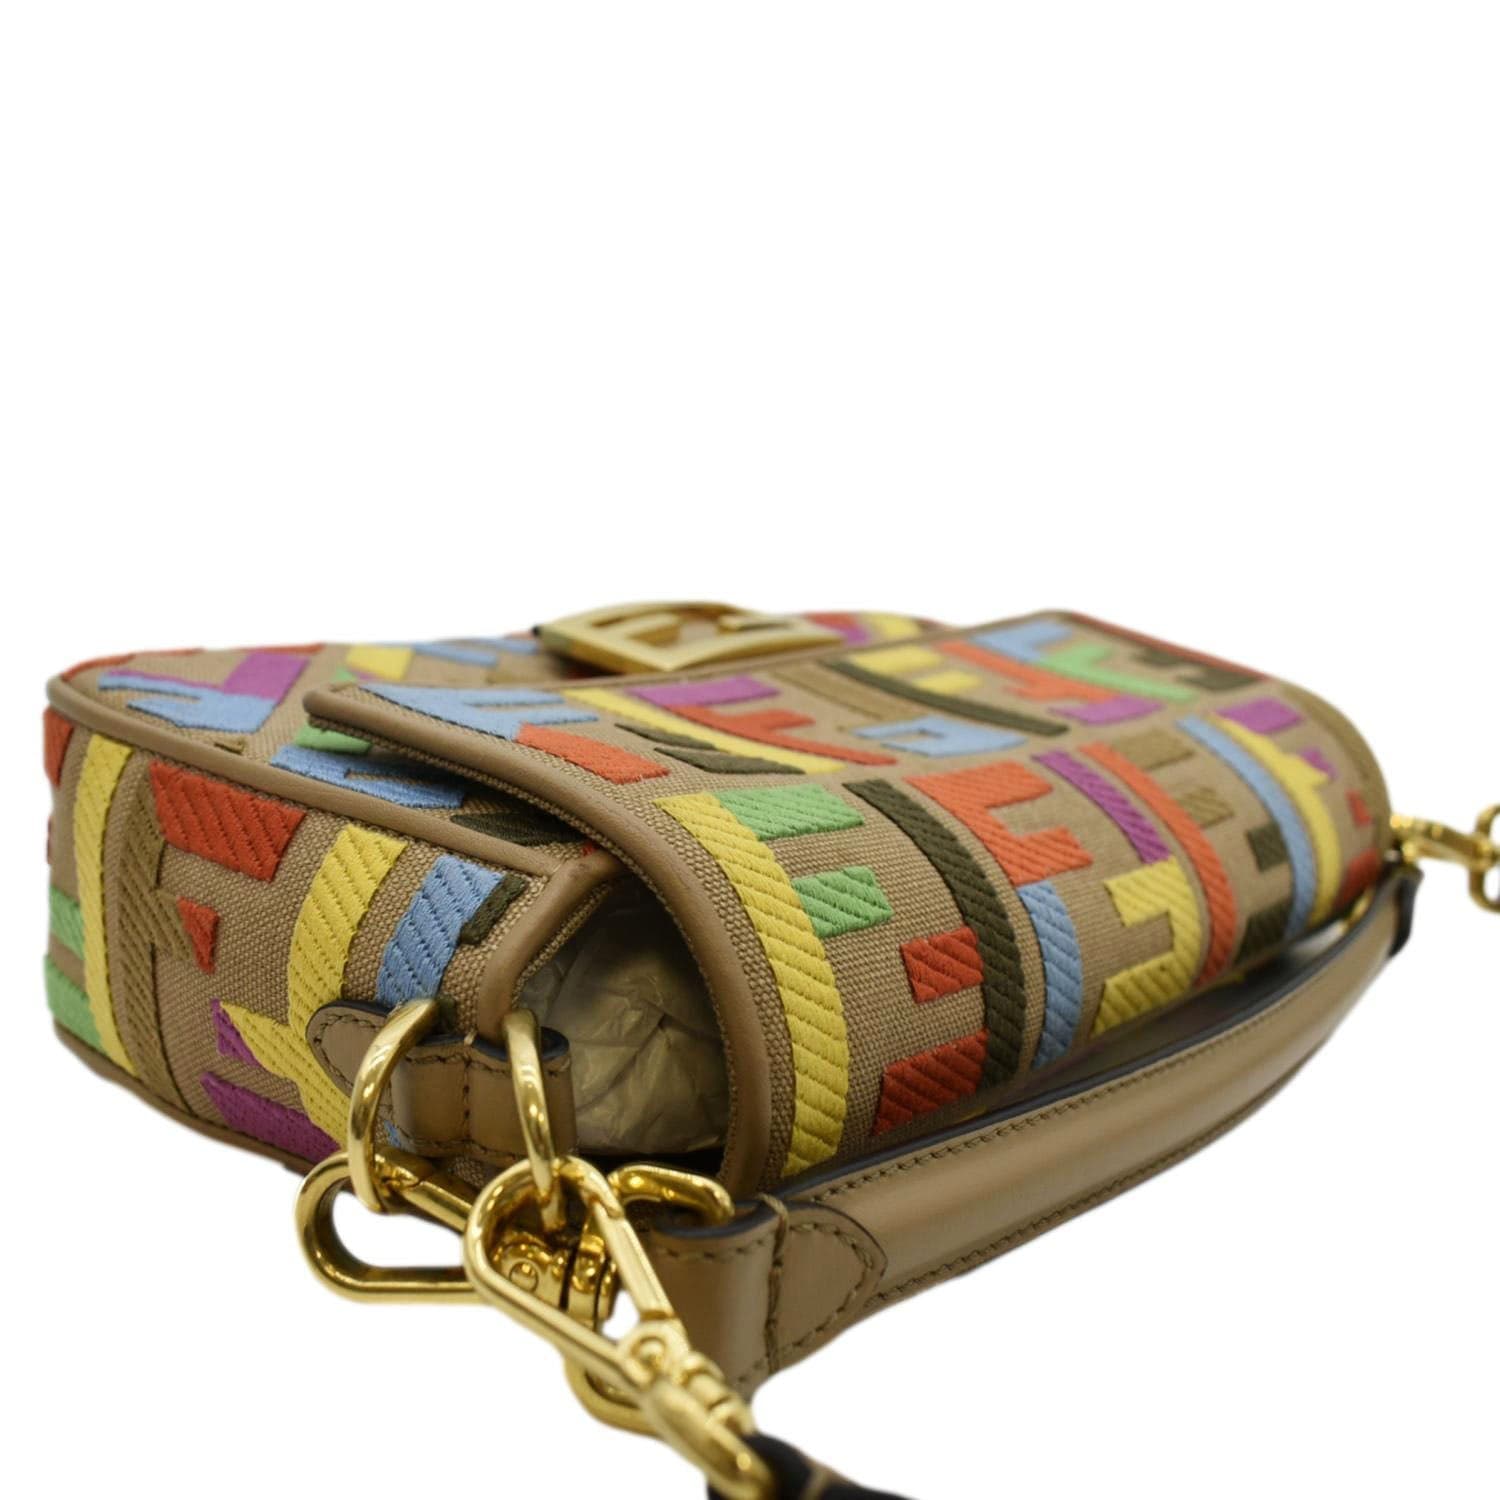 BAGUETTE bag in multicolor canvas with FF embroidery